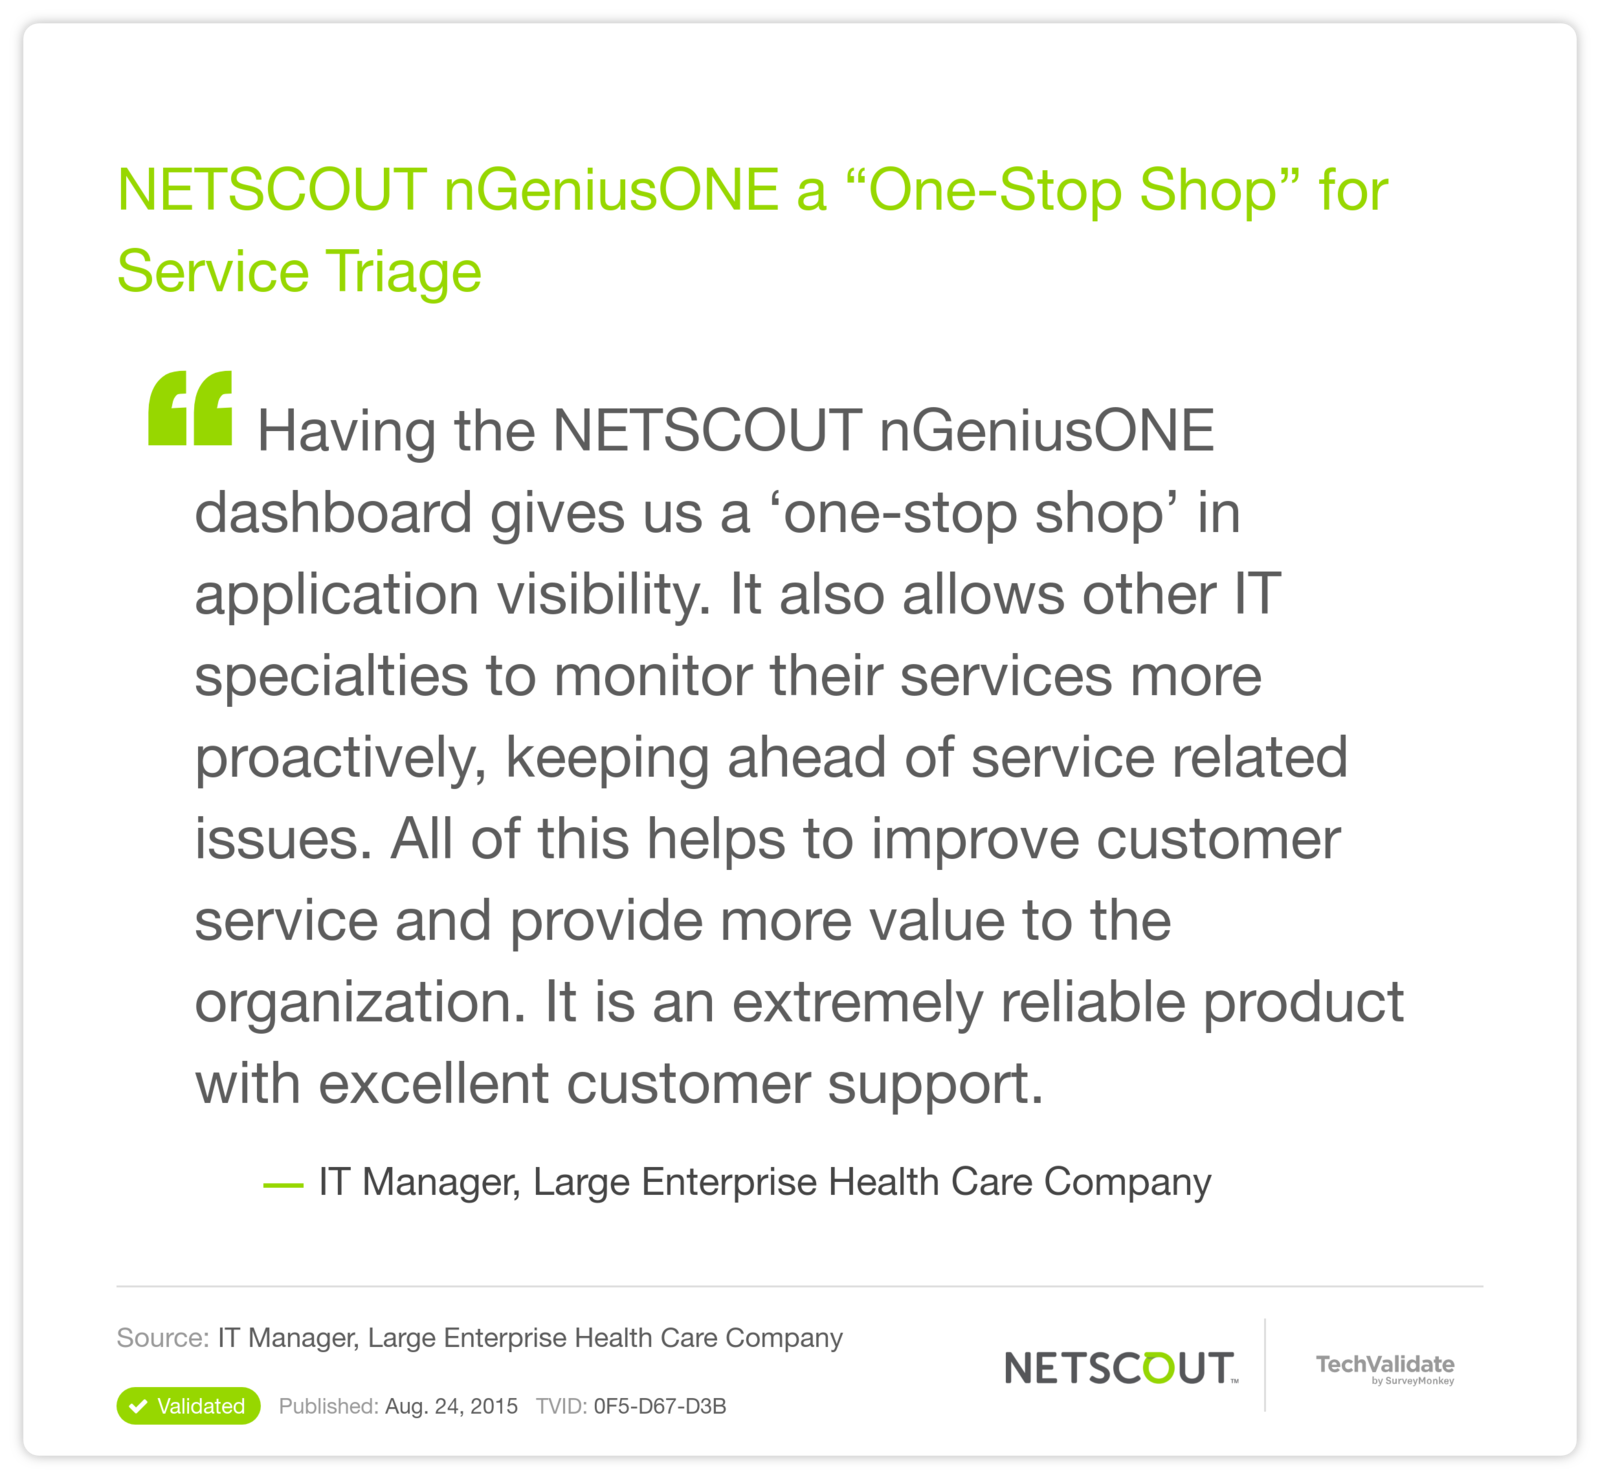 NETSCOUT nGeniusONE a "One-Stop Shop" for Service Triage